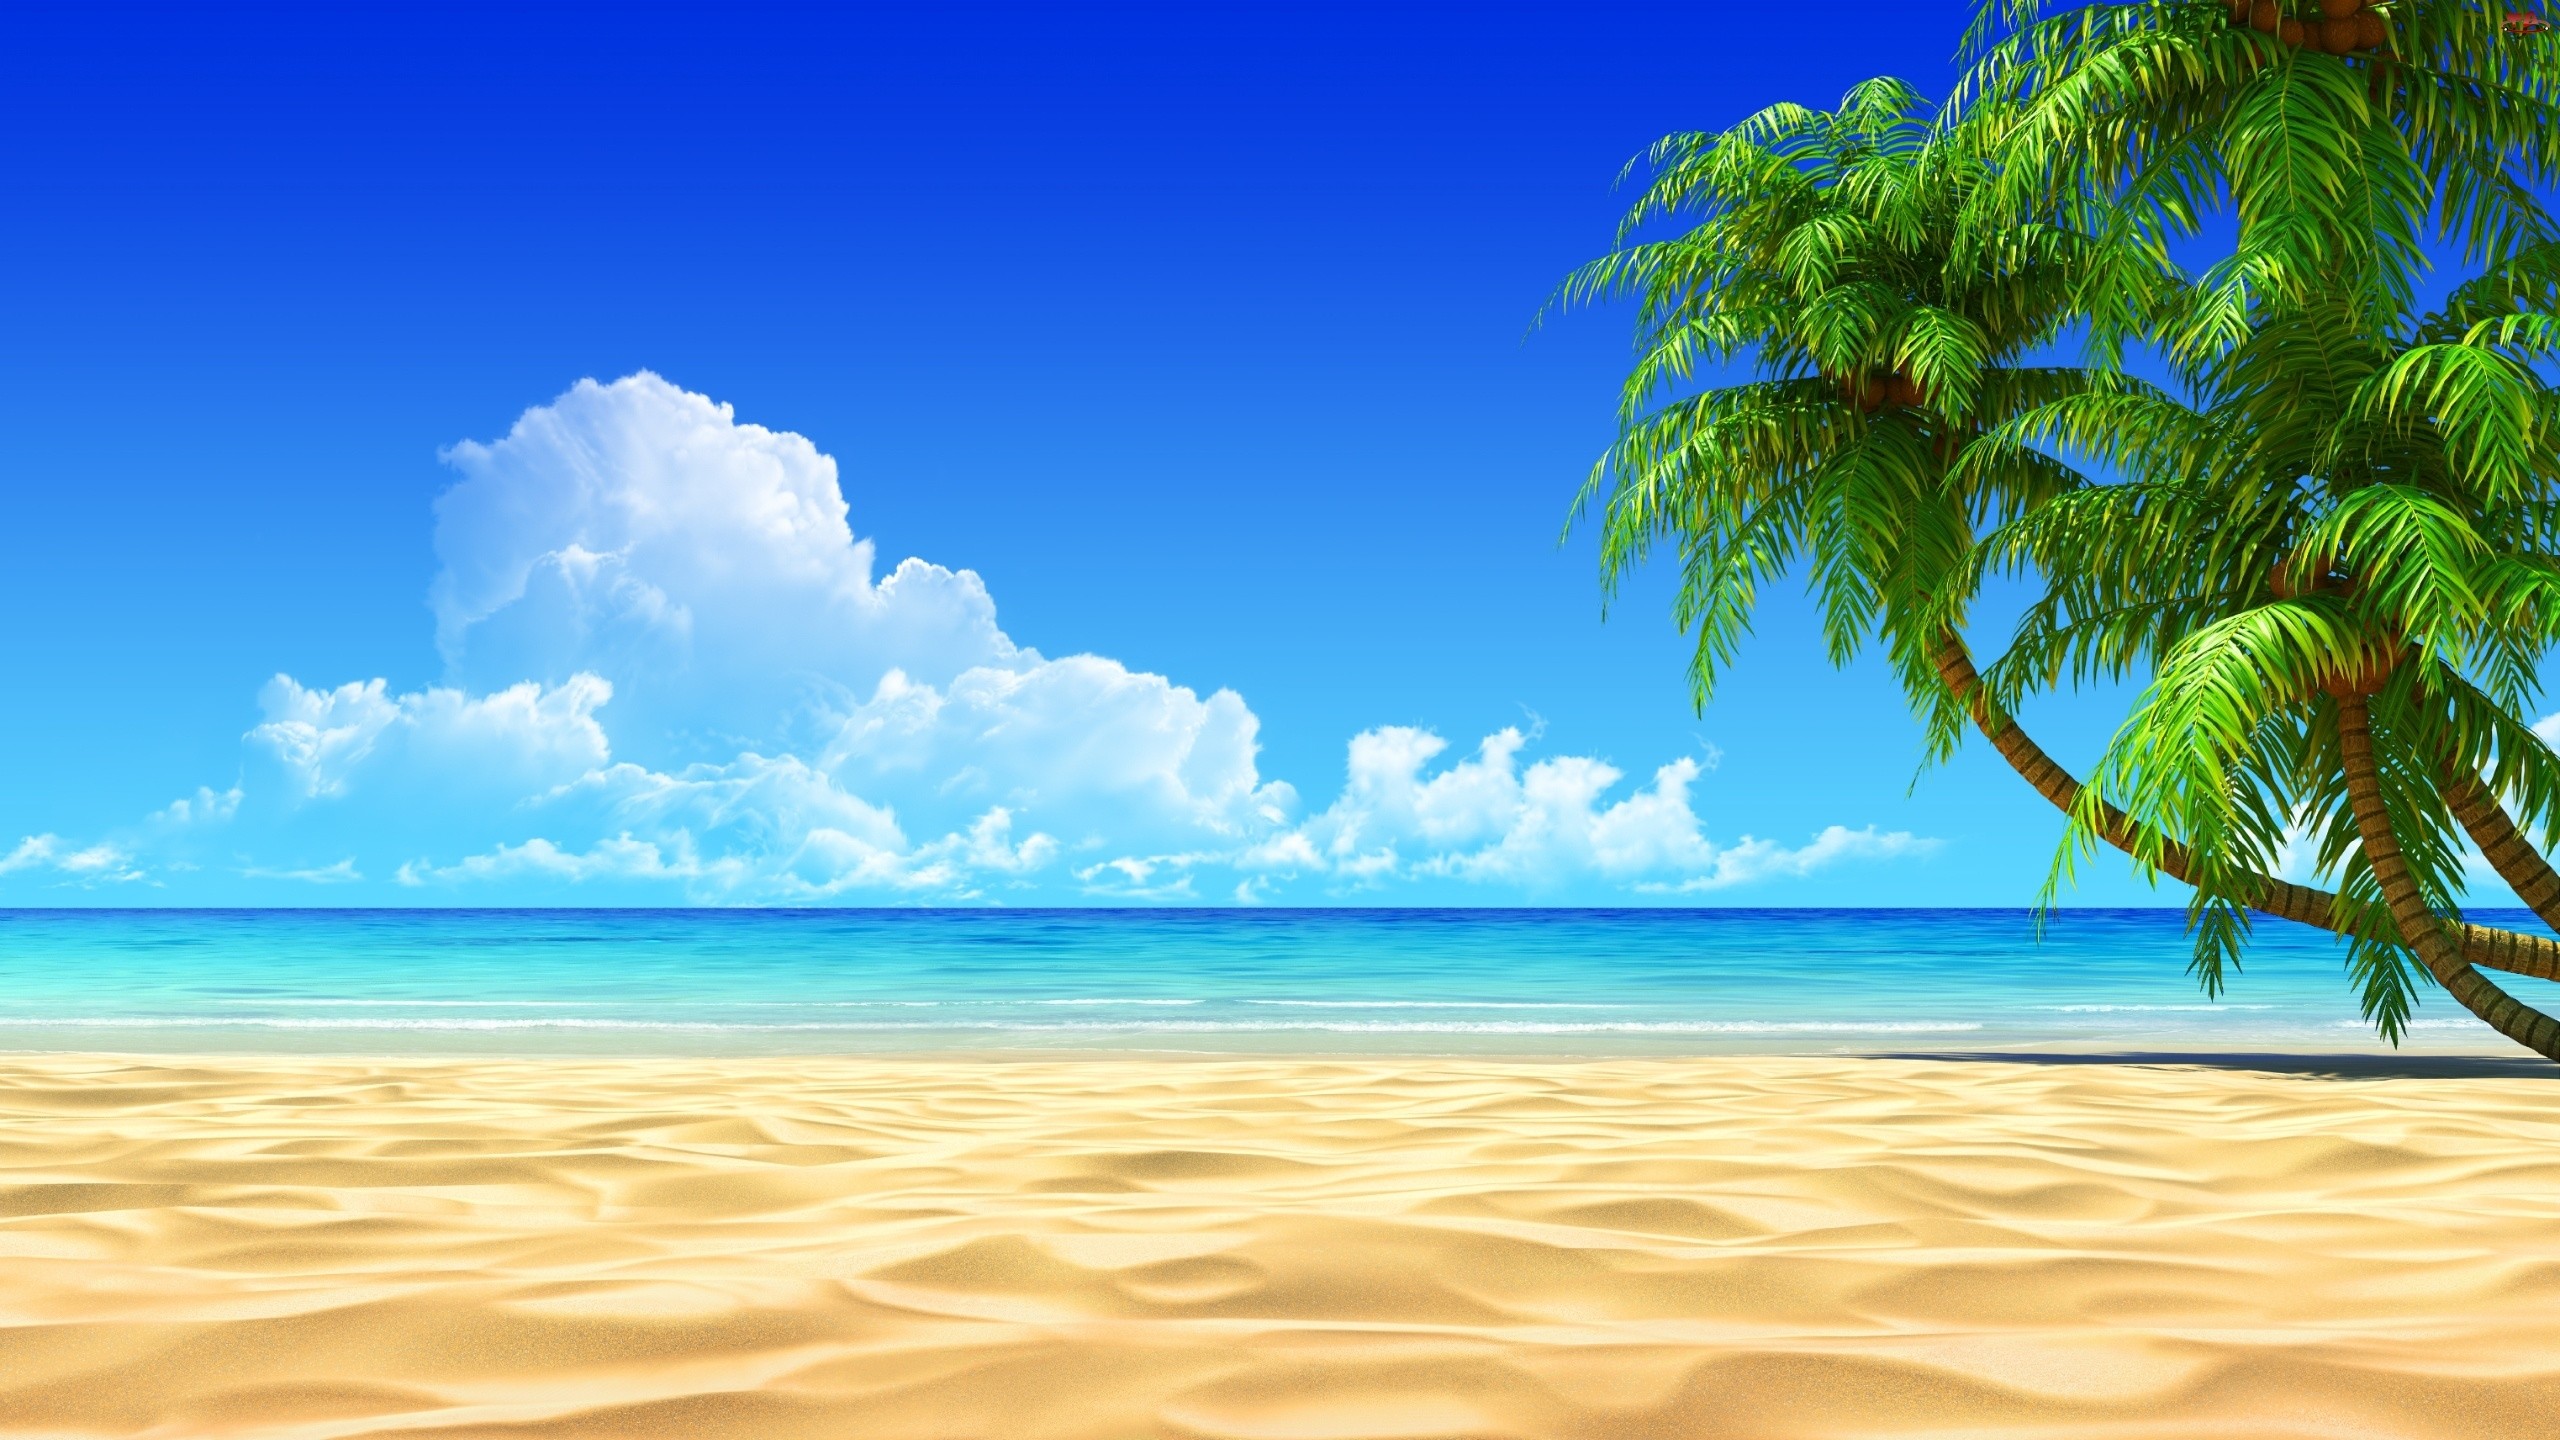 HD Beach Backgrounds 74 images